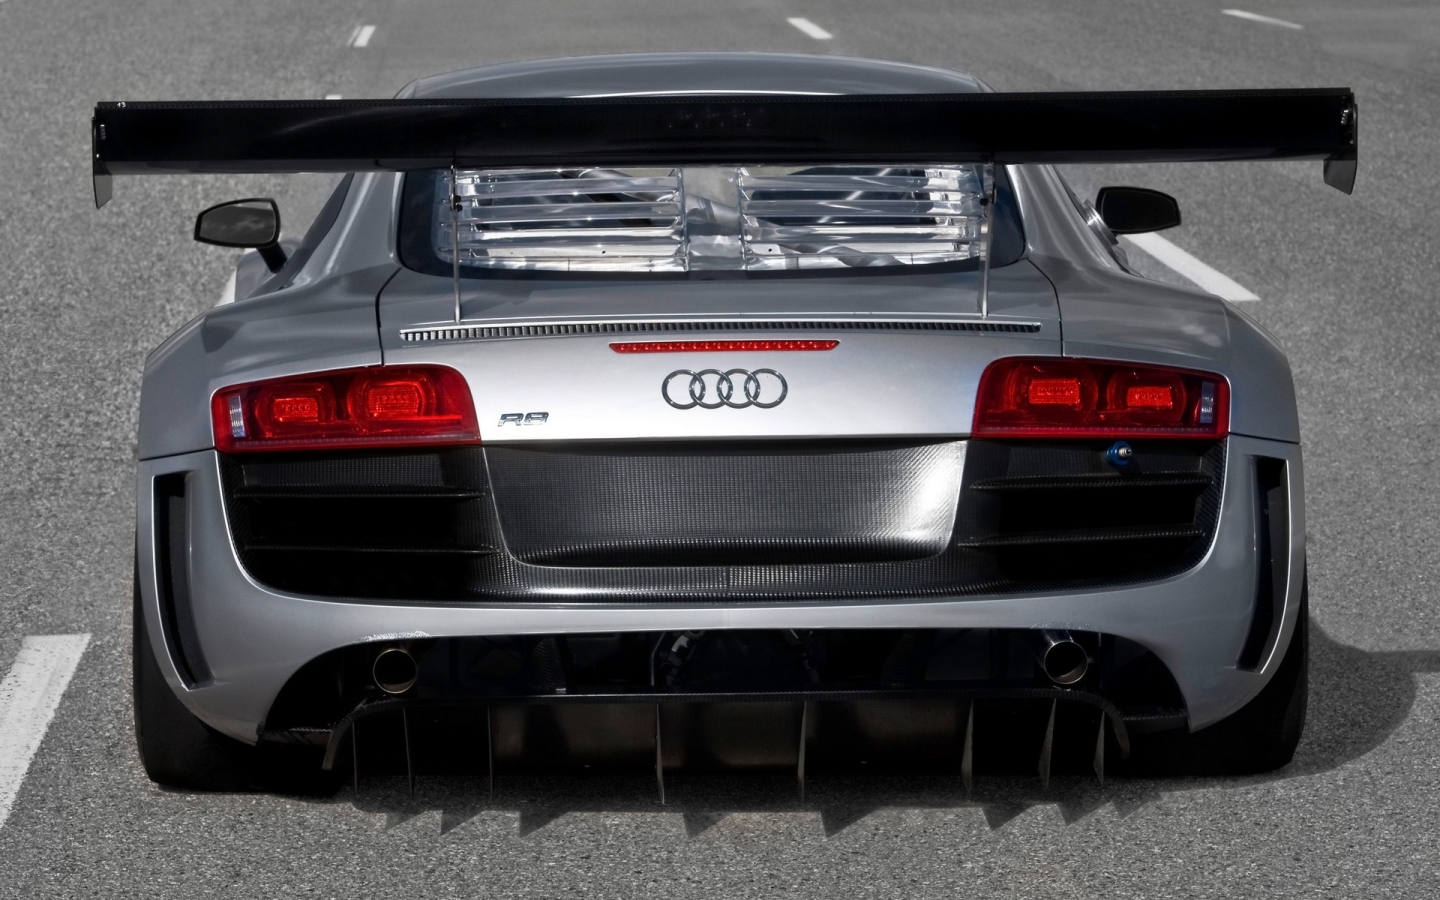 2009 Audi R8 GT3 - Rear for 1440 x 900 widescreen resolution